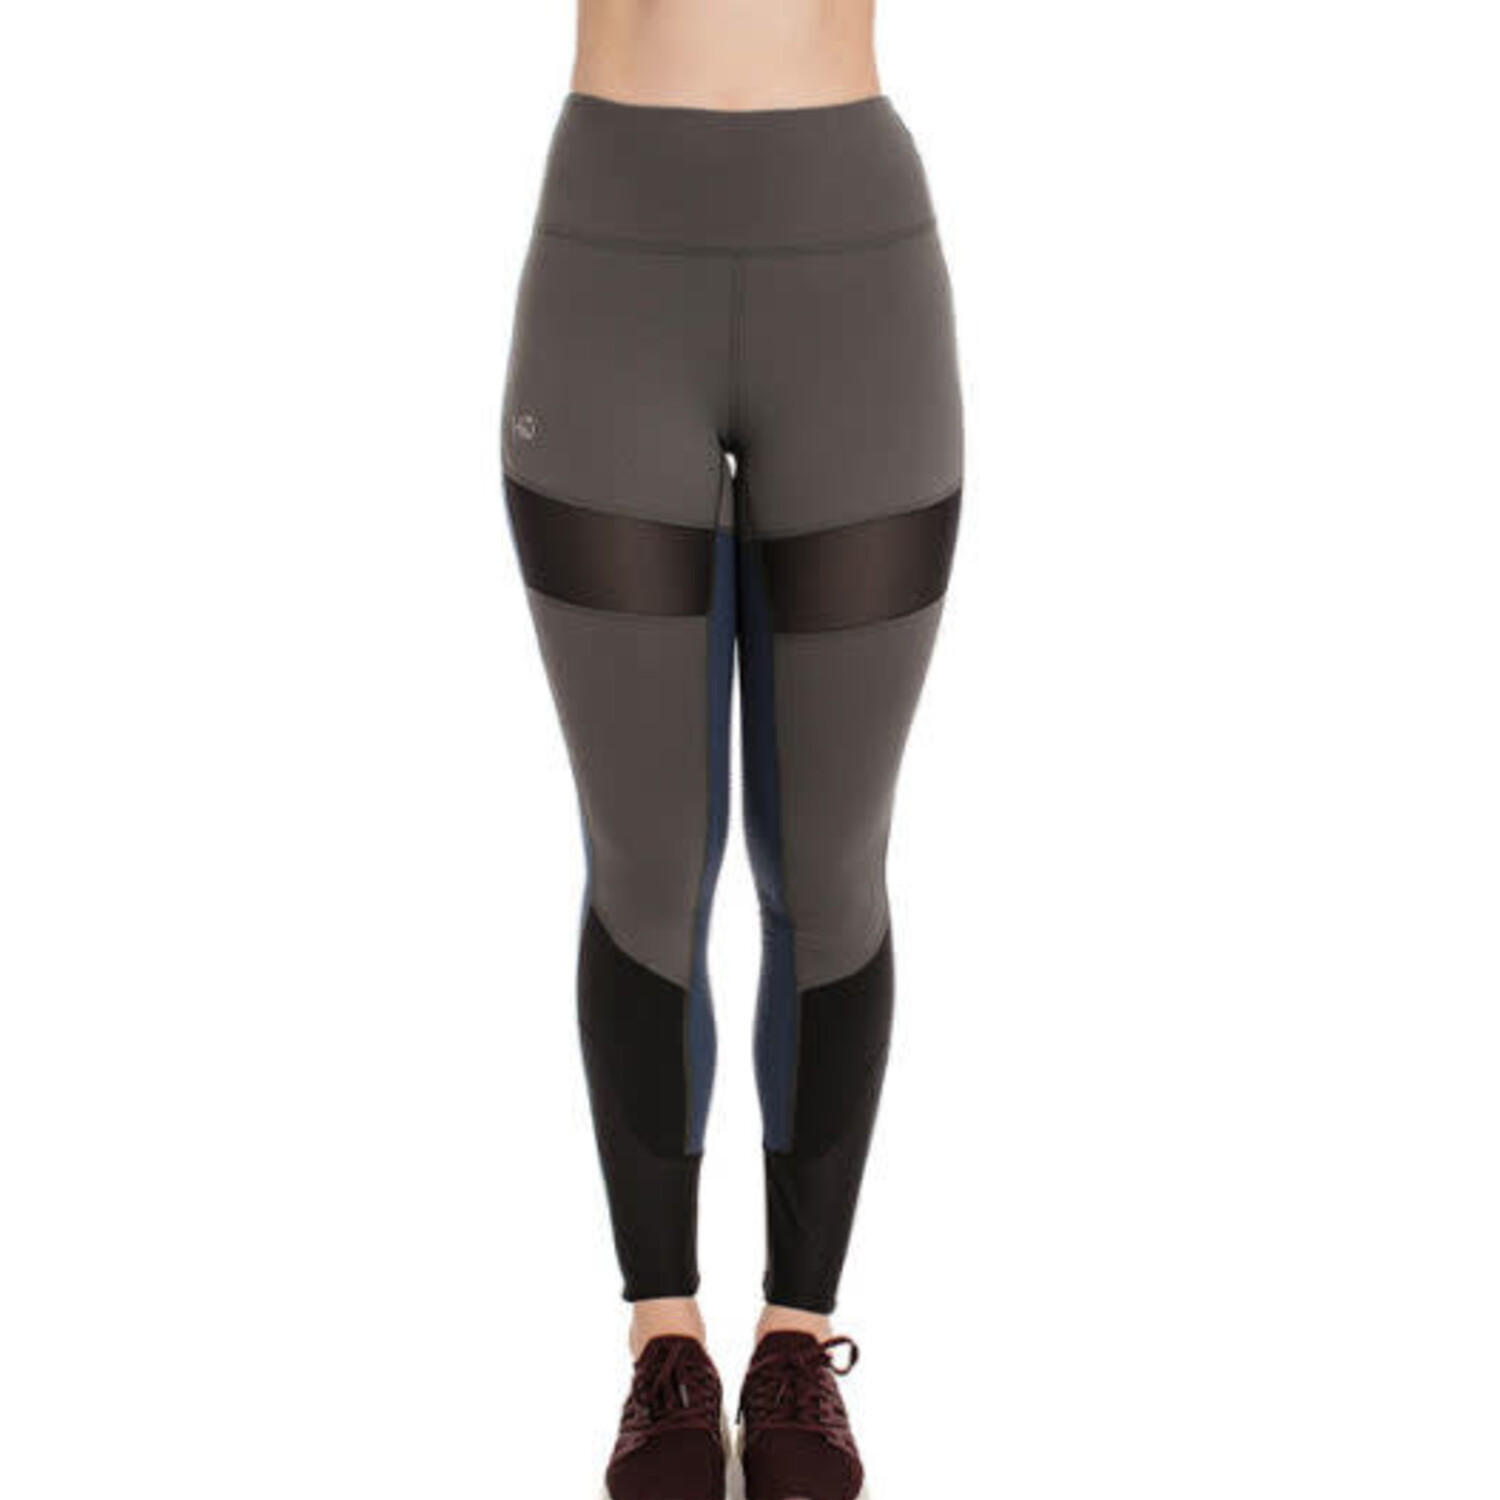 KYLIE - RIDING LEGGINGS  BLACK ''SILVER'' FULL SEAT SILICONE